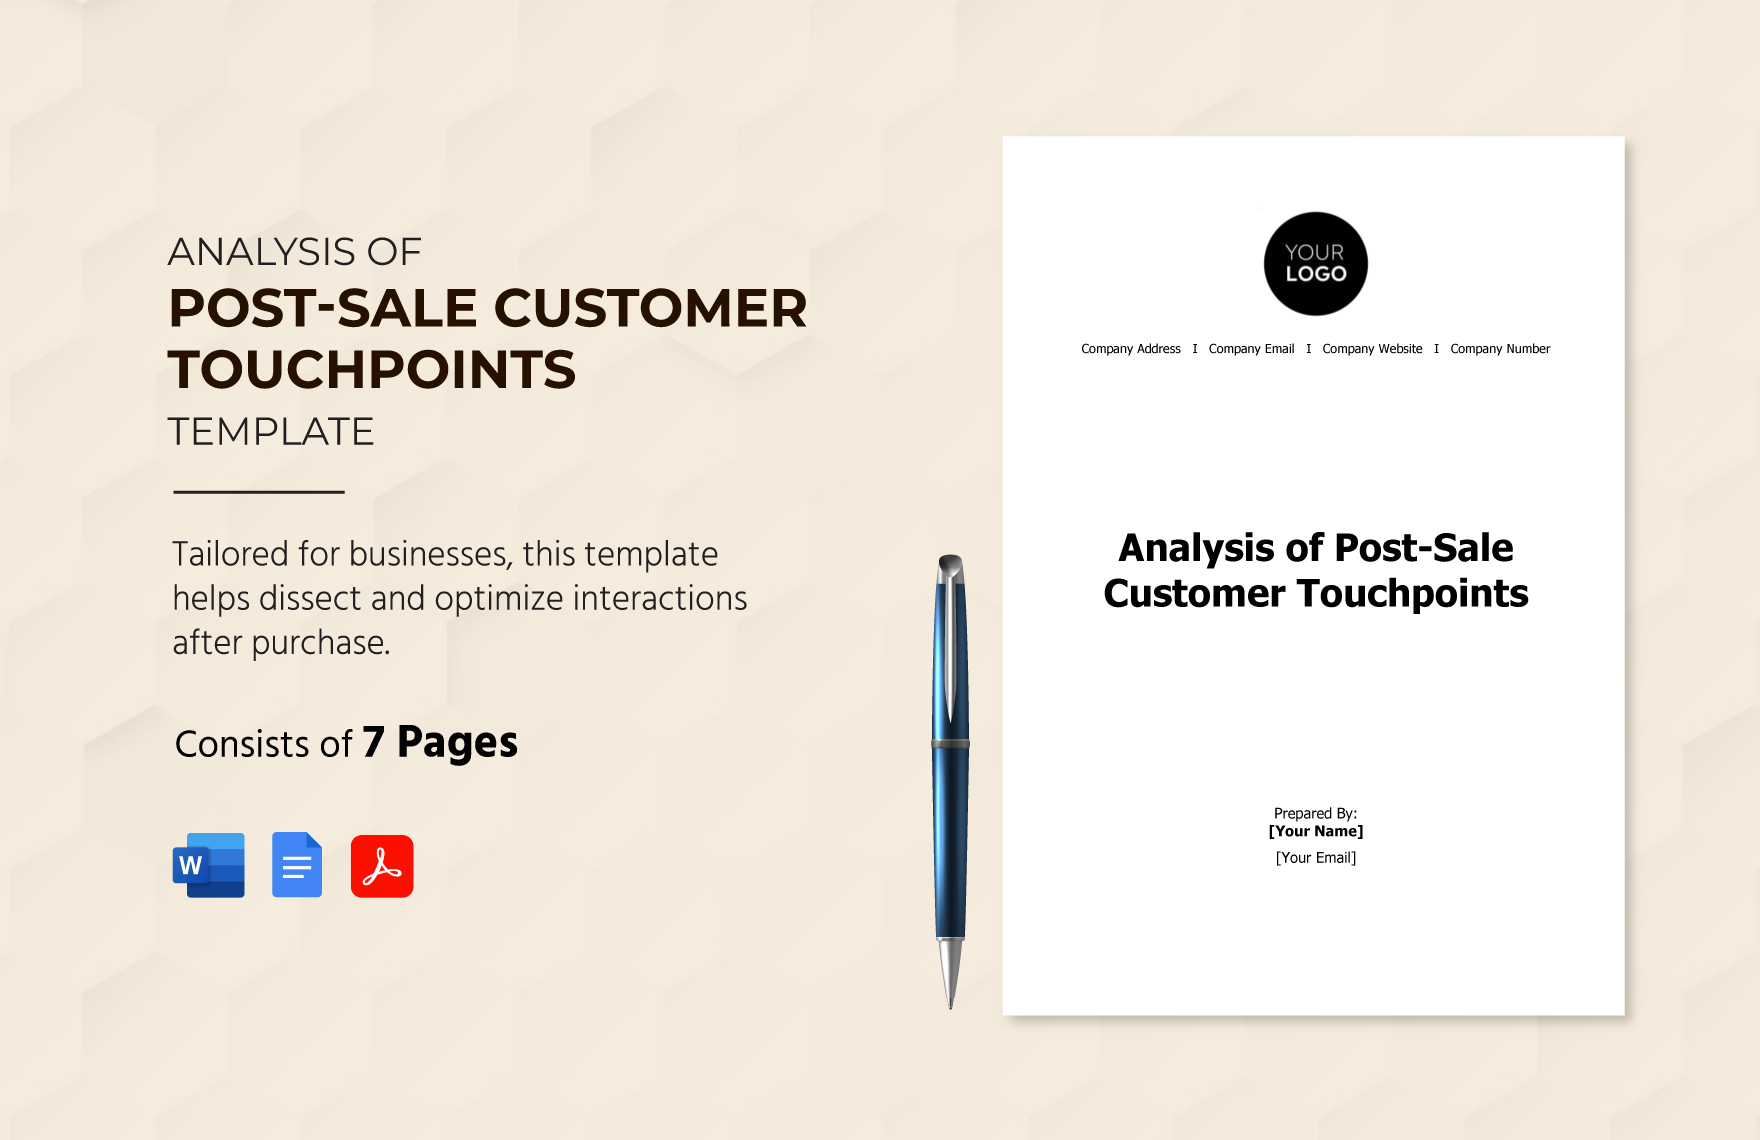 Analysis of Post-Sale Customer Touchpoints Template